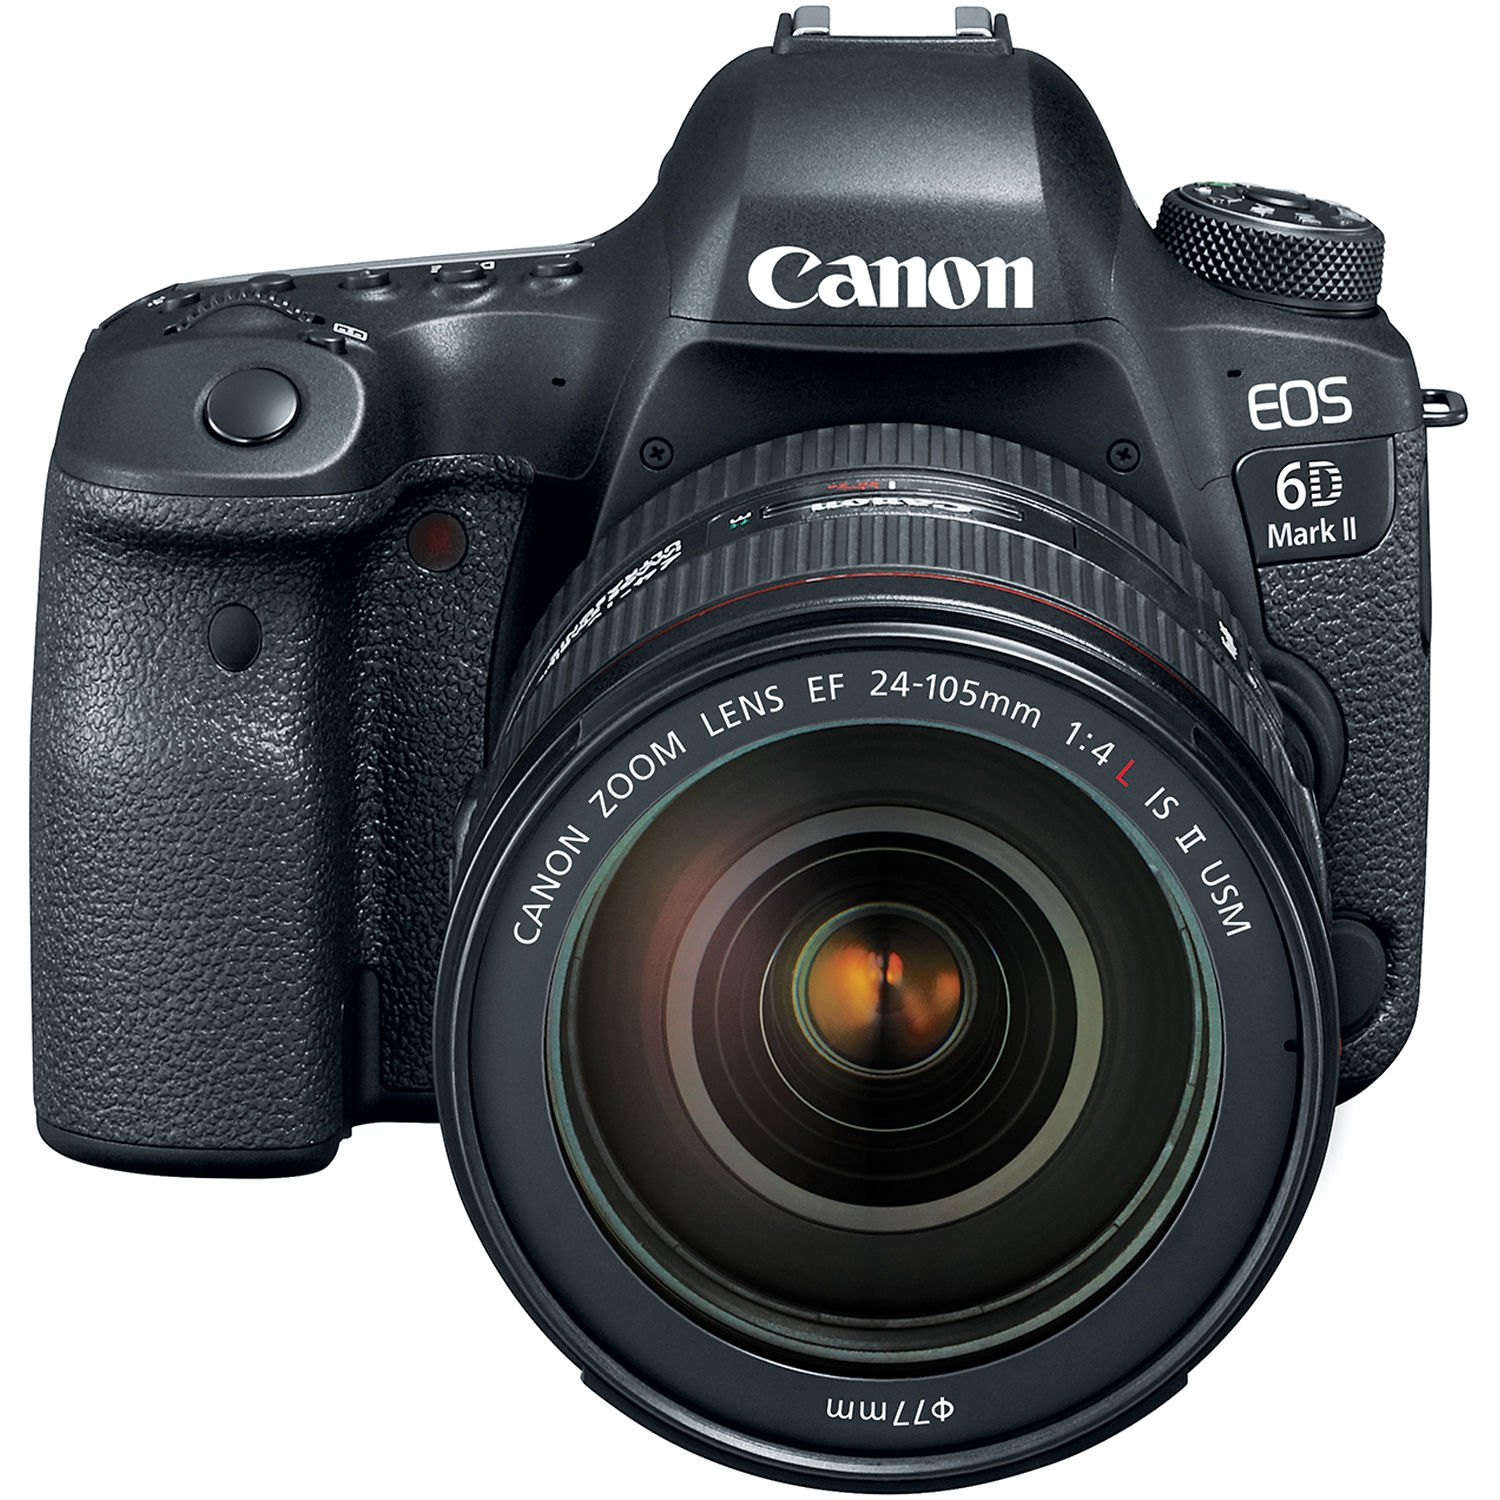 Canon EOS 6D Mark II DSLR Camera with 24-105mm f/4L II Lens - image 3 of 4